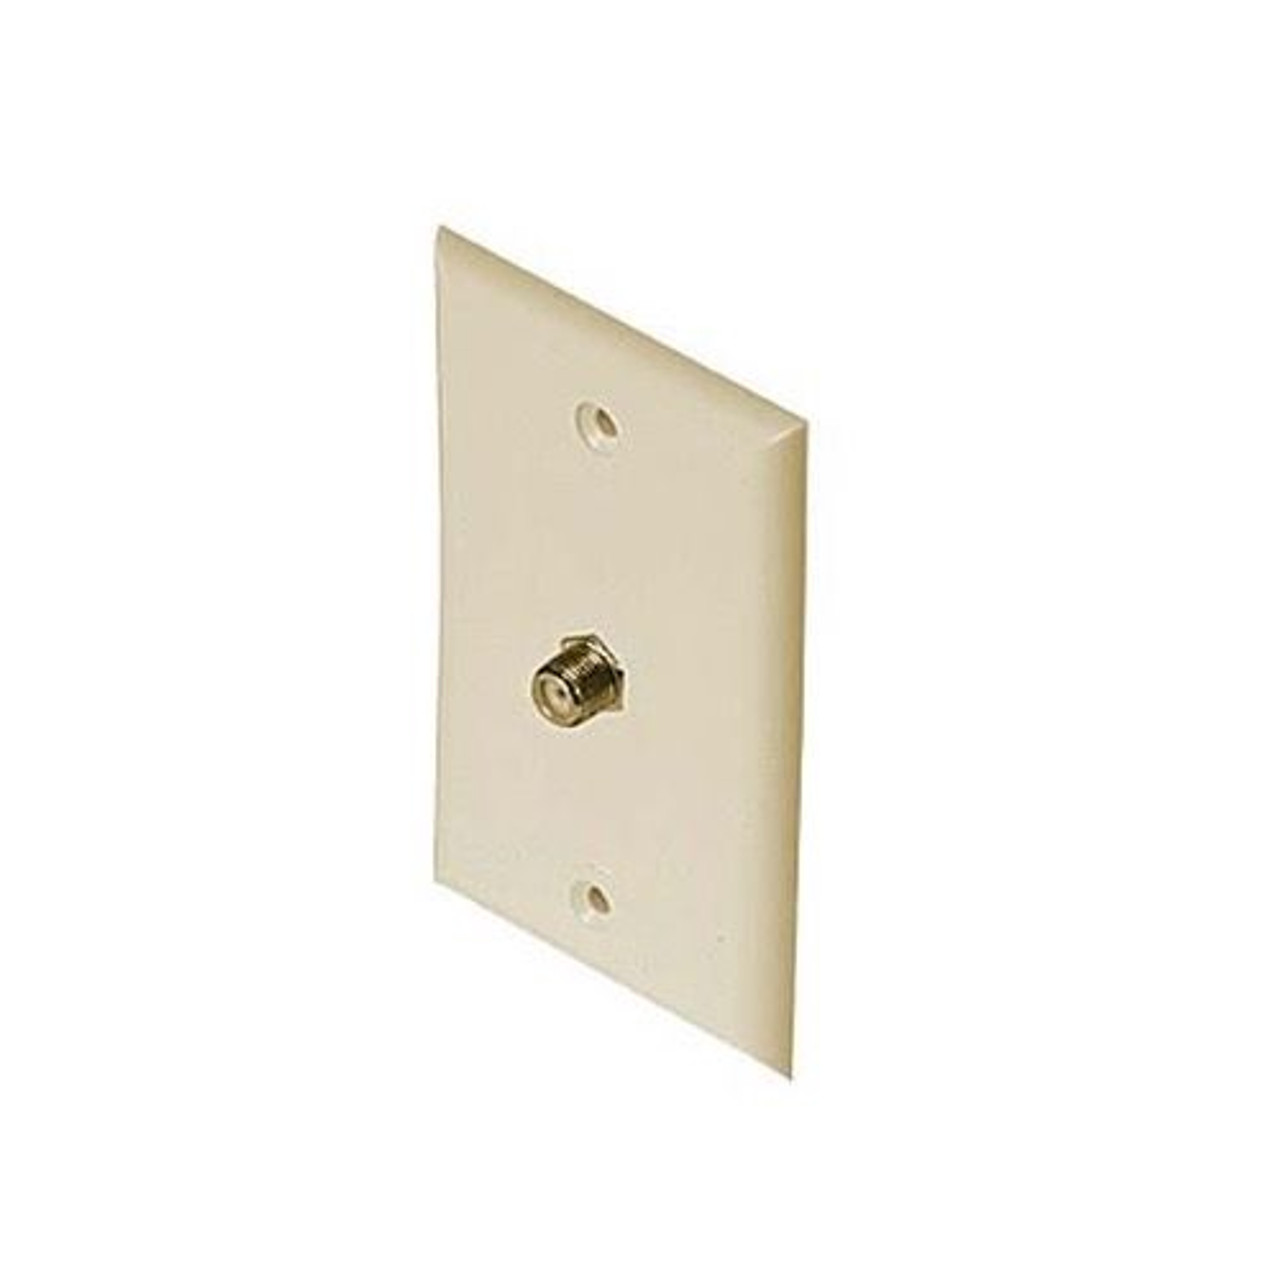 Leviton C5256 Ivory F-81 Wall Plate Single Gang Coax Cable 1 Pack Video Cable 75 Ohm Antenna Outlet Plug Connector Flush Mount Cover, Contractor Pack, Part # C5256I